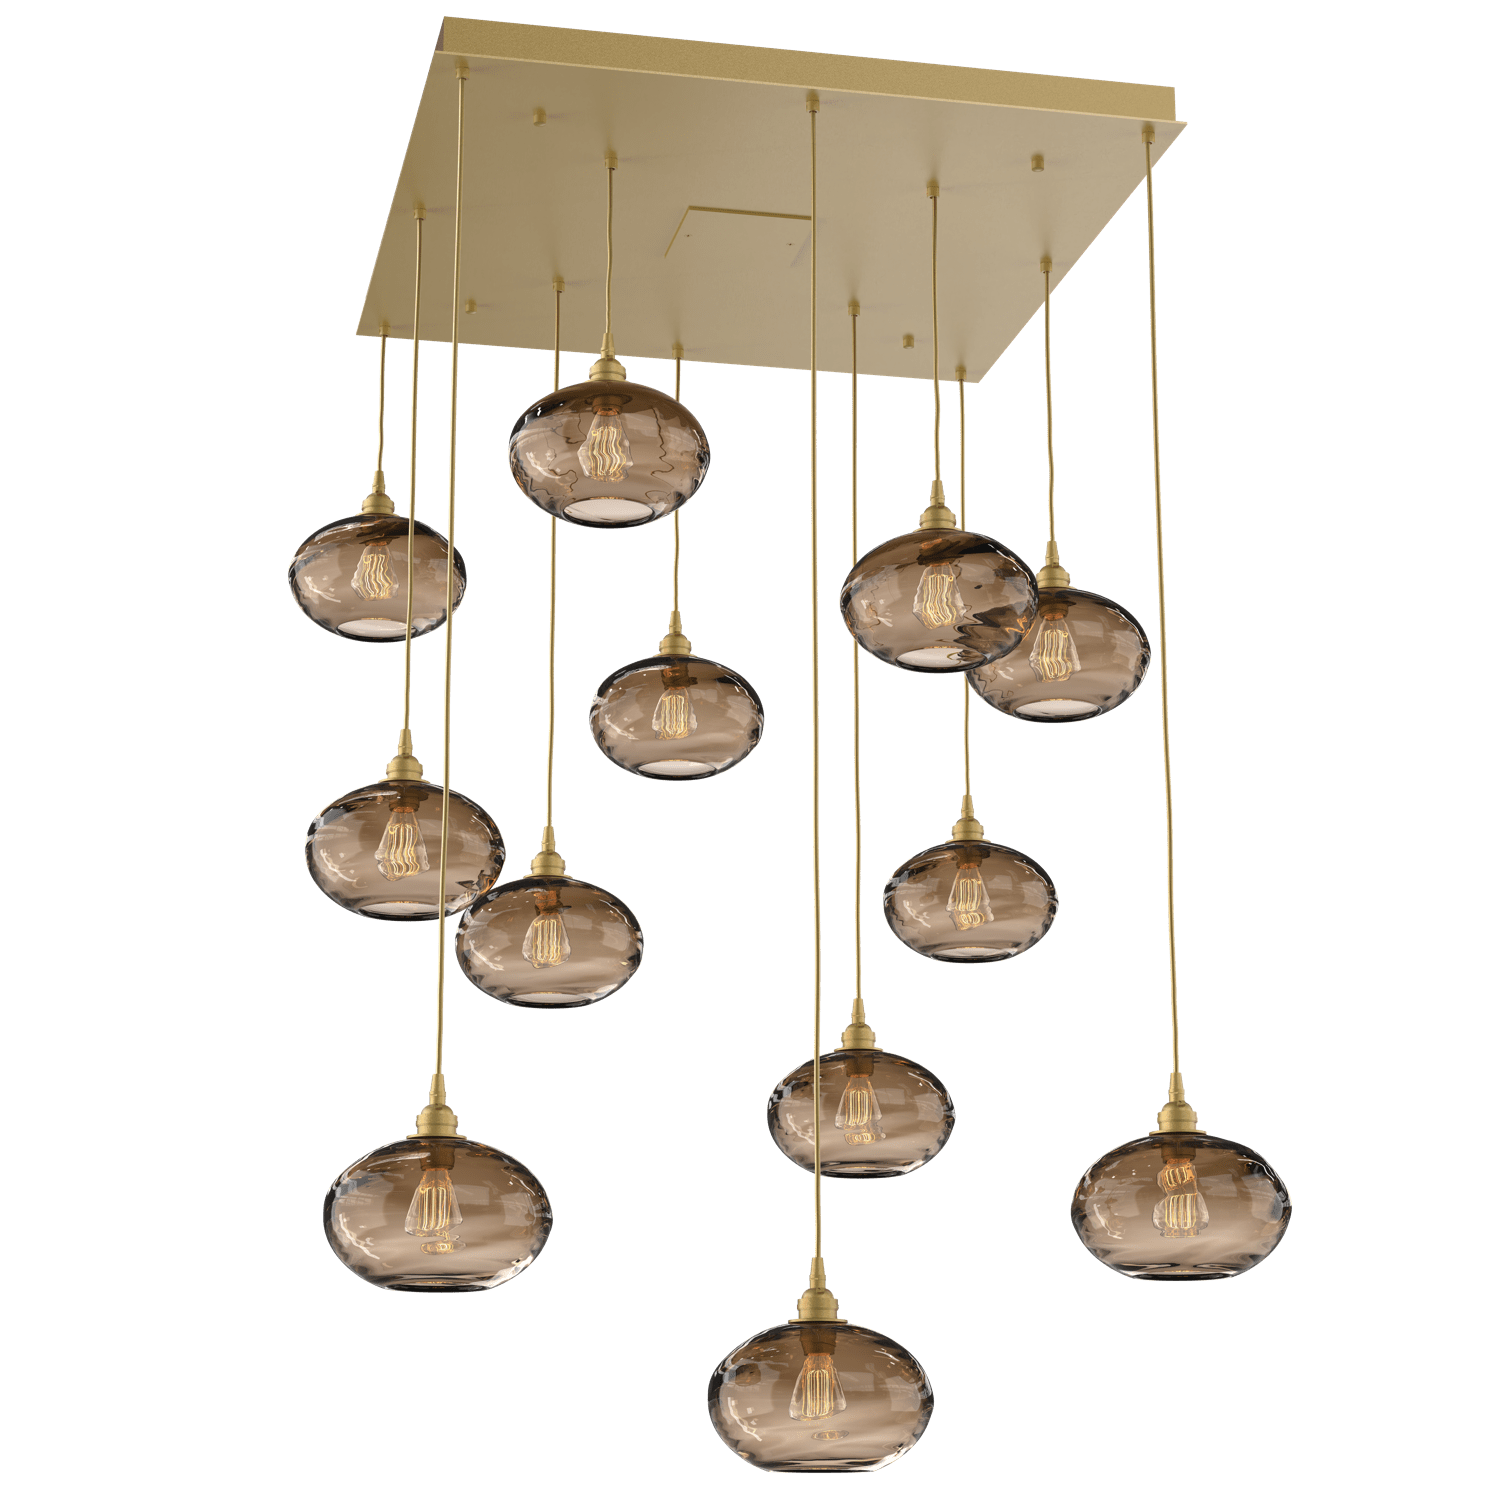 CHB0036-12-GB-OB-Hammerton-Studio-Optic-Blown-Glass-Coppa-12-light-square-pendant-chandelier-with-gilded-brass-finish-and-optic-bronze-blown-glass-shades-and-incandescent-lamping